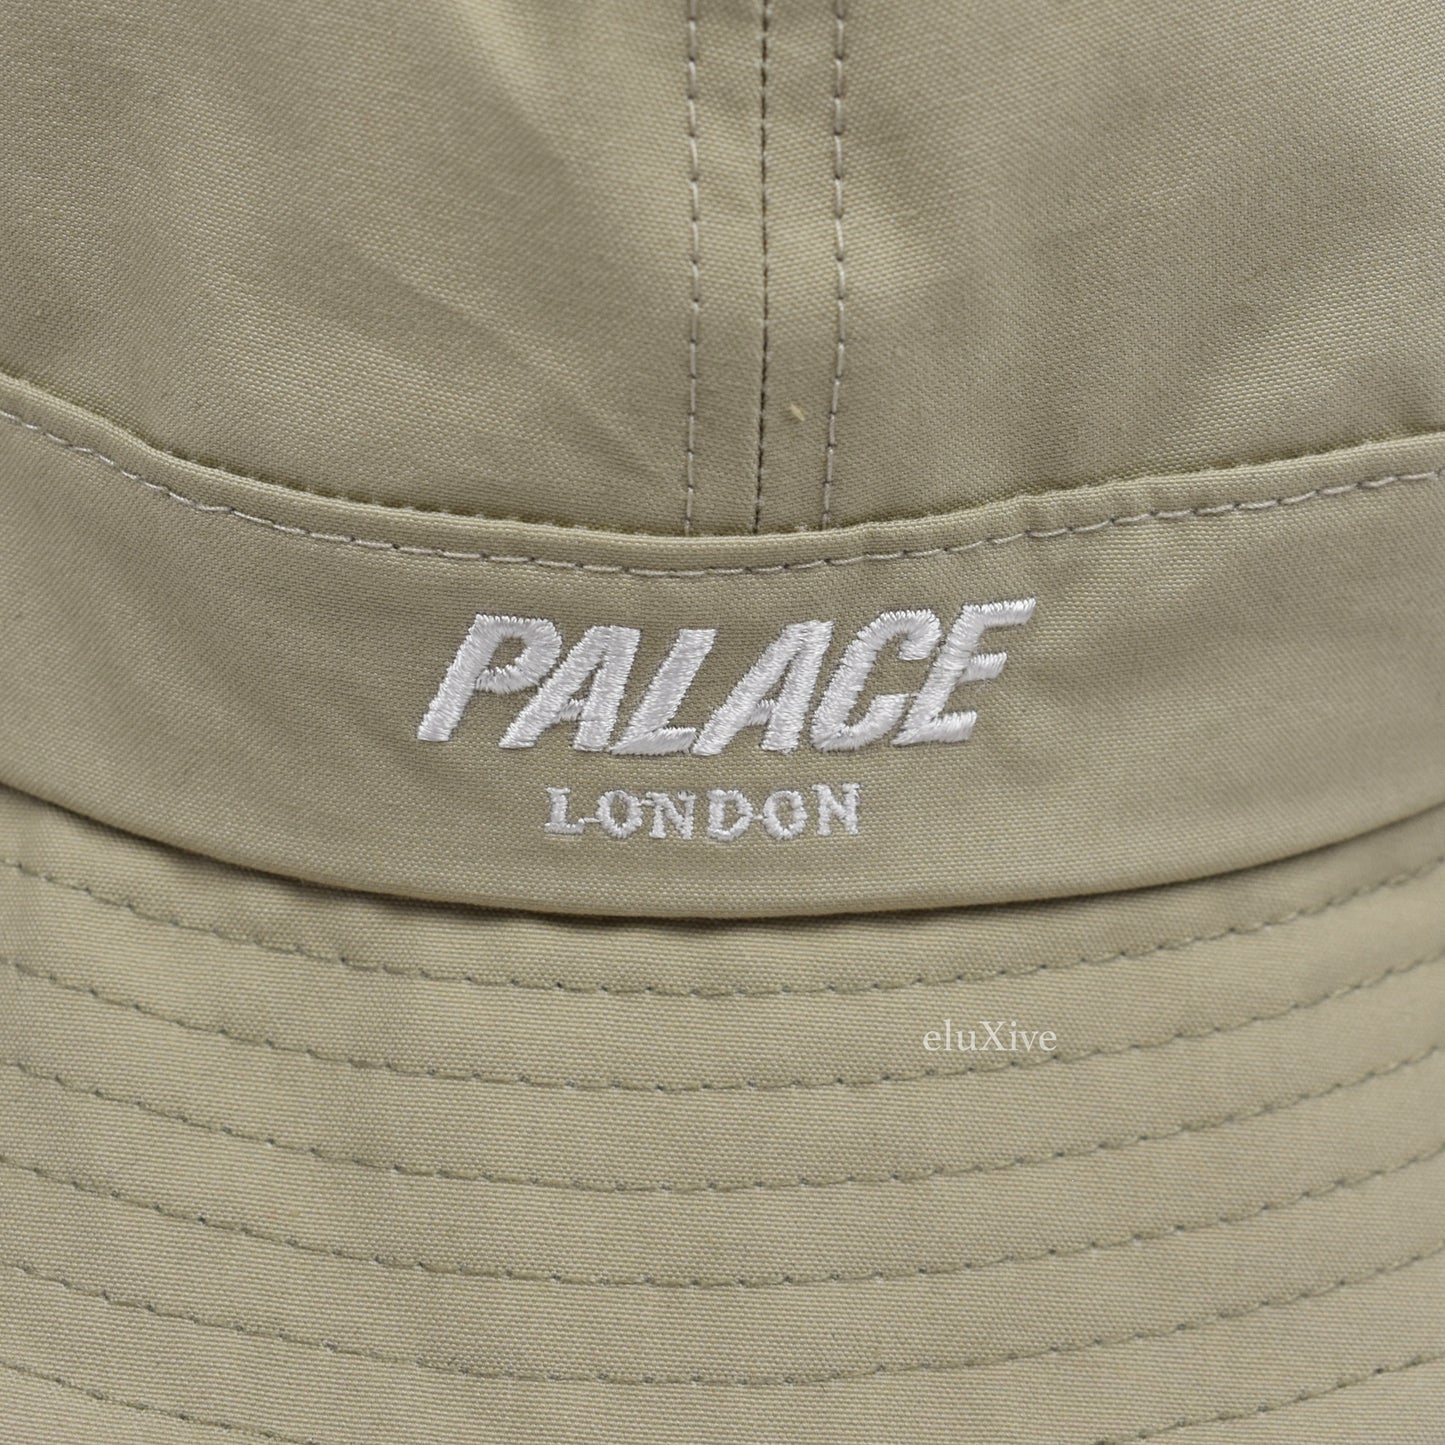 Palace - Ventile Logo Embroidered Bucket Hat (Stone)